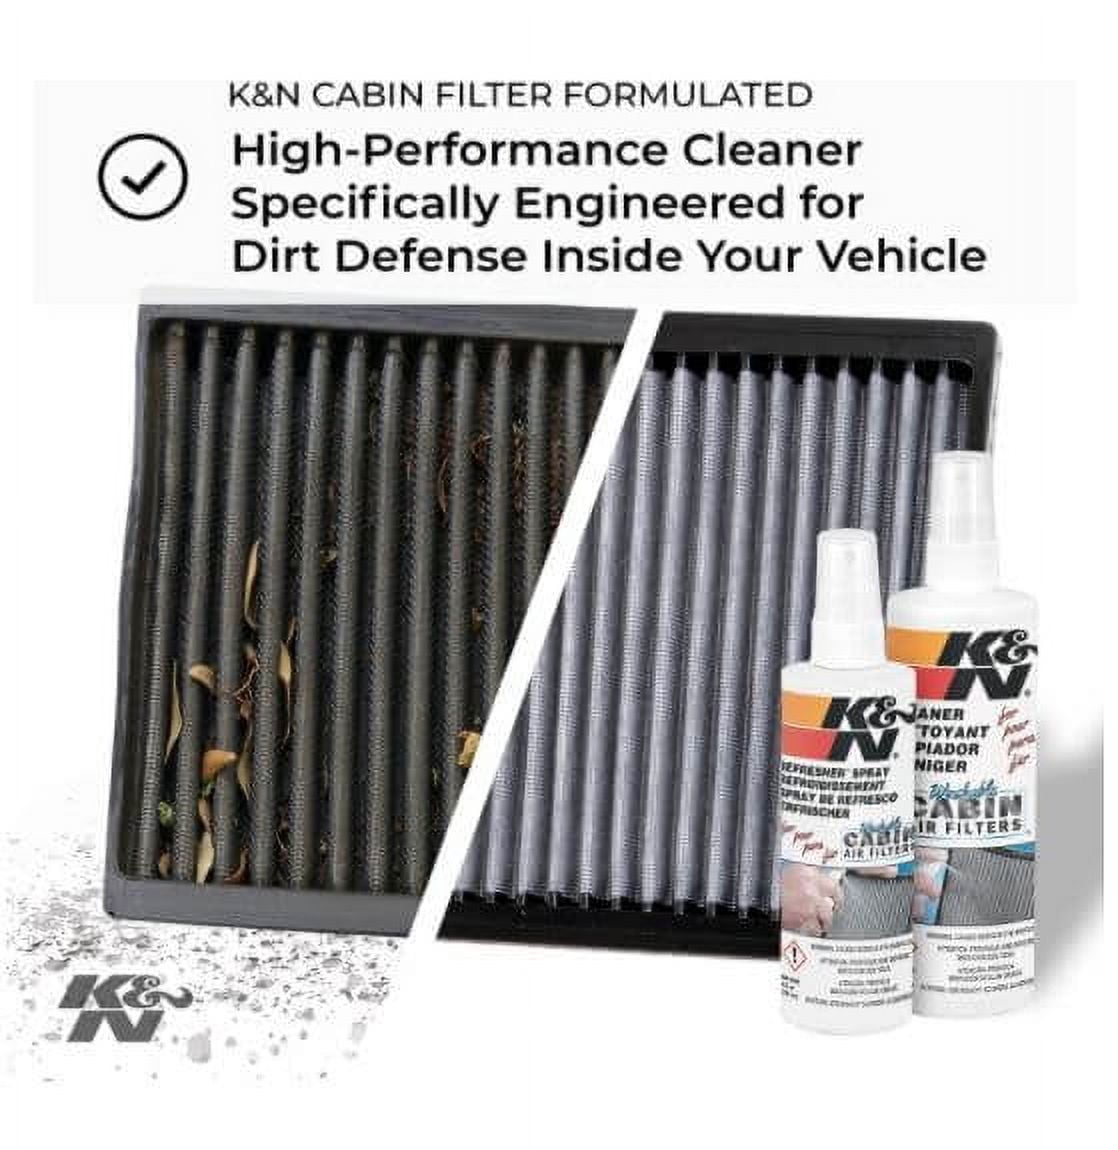 K&N Cabin Air Filter Cleaner - Read Reviews & FREE SHIPPING!